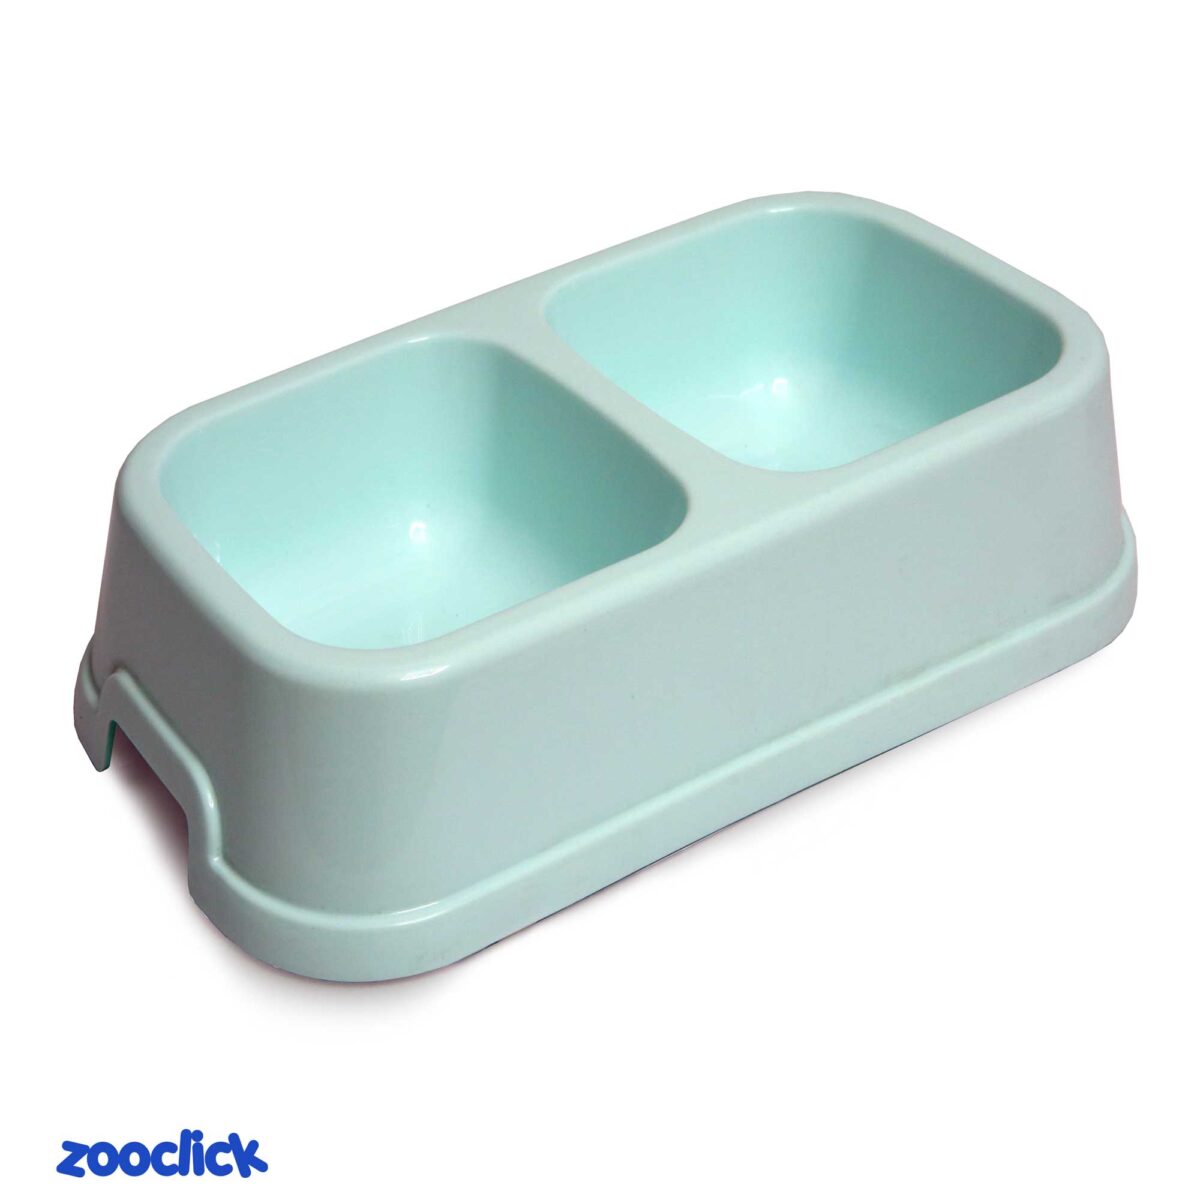 zc-romito-double-dishes-for-dog-cat-110-01